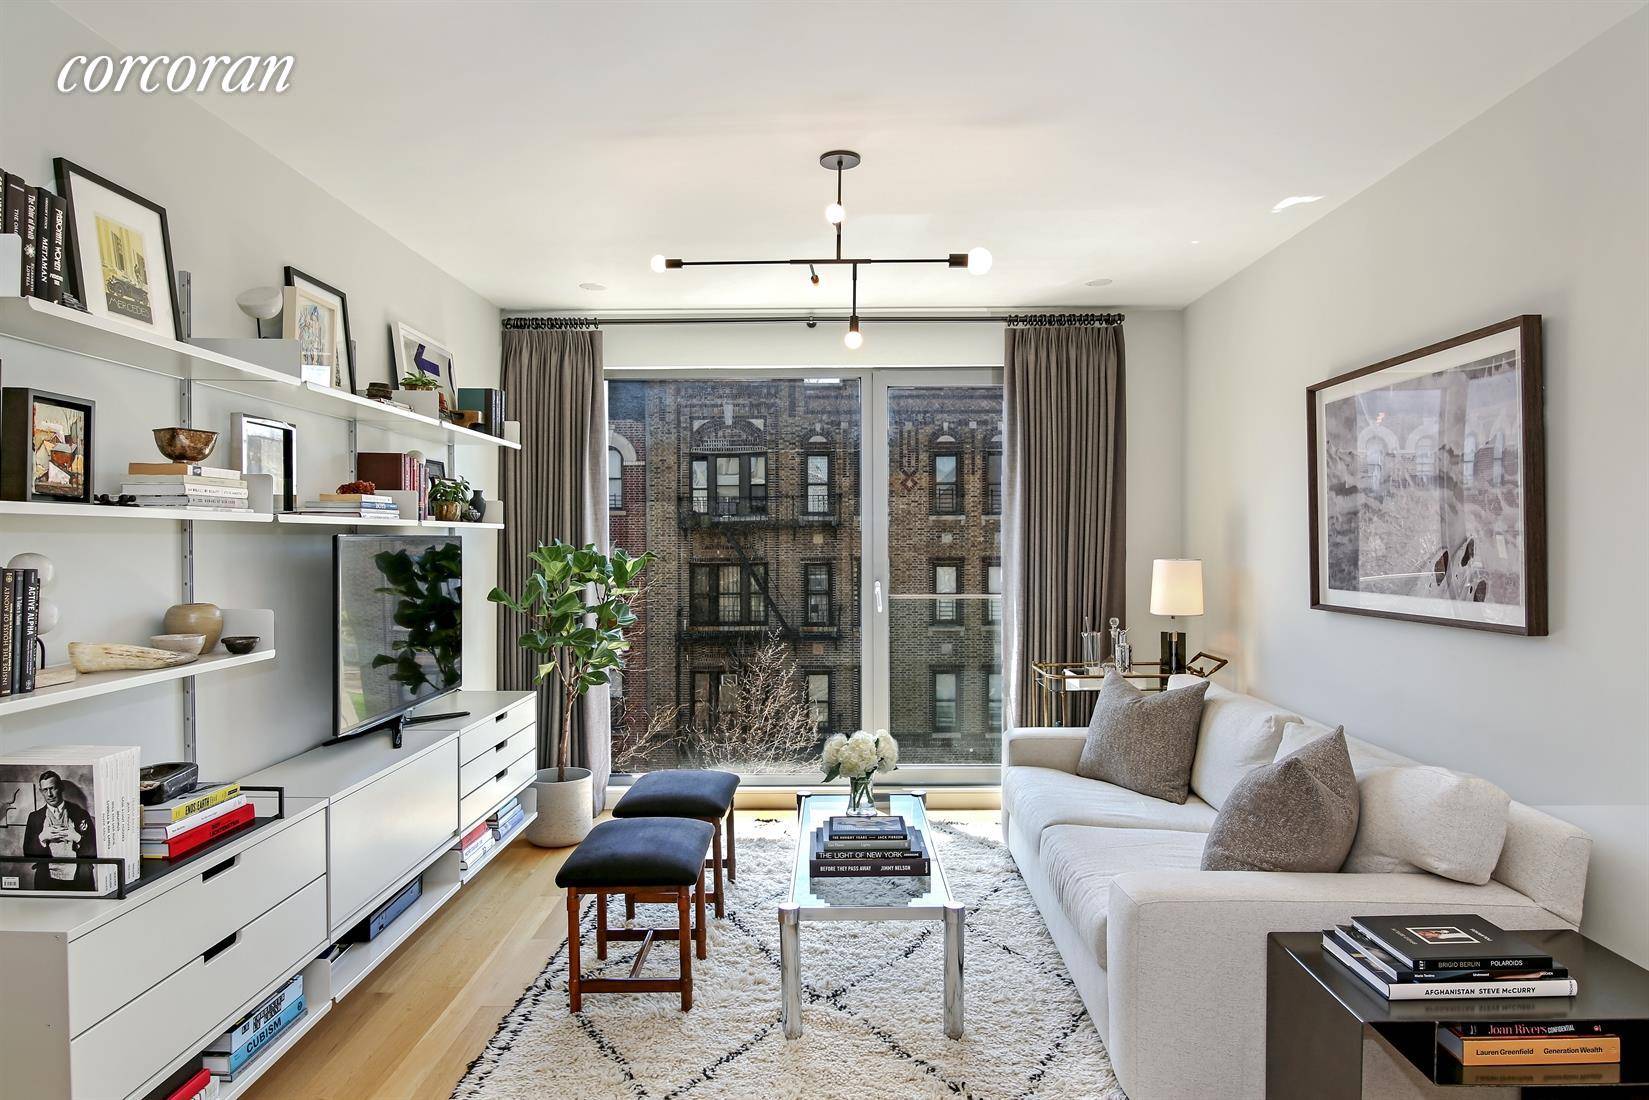 Three Seventy Five Condominiums Introducing 375 Prospect Place an architecturally designed boutique 8 unit condominium residence on a beautiful tree lined and brownstone rich street in vibrant Prospect Heights.